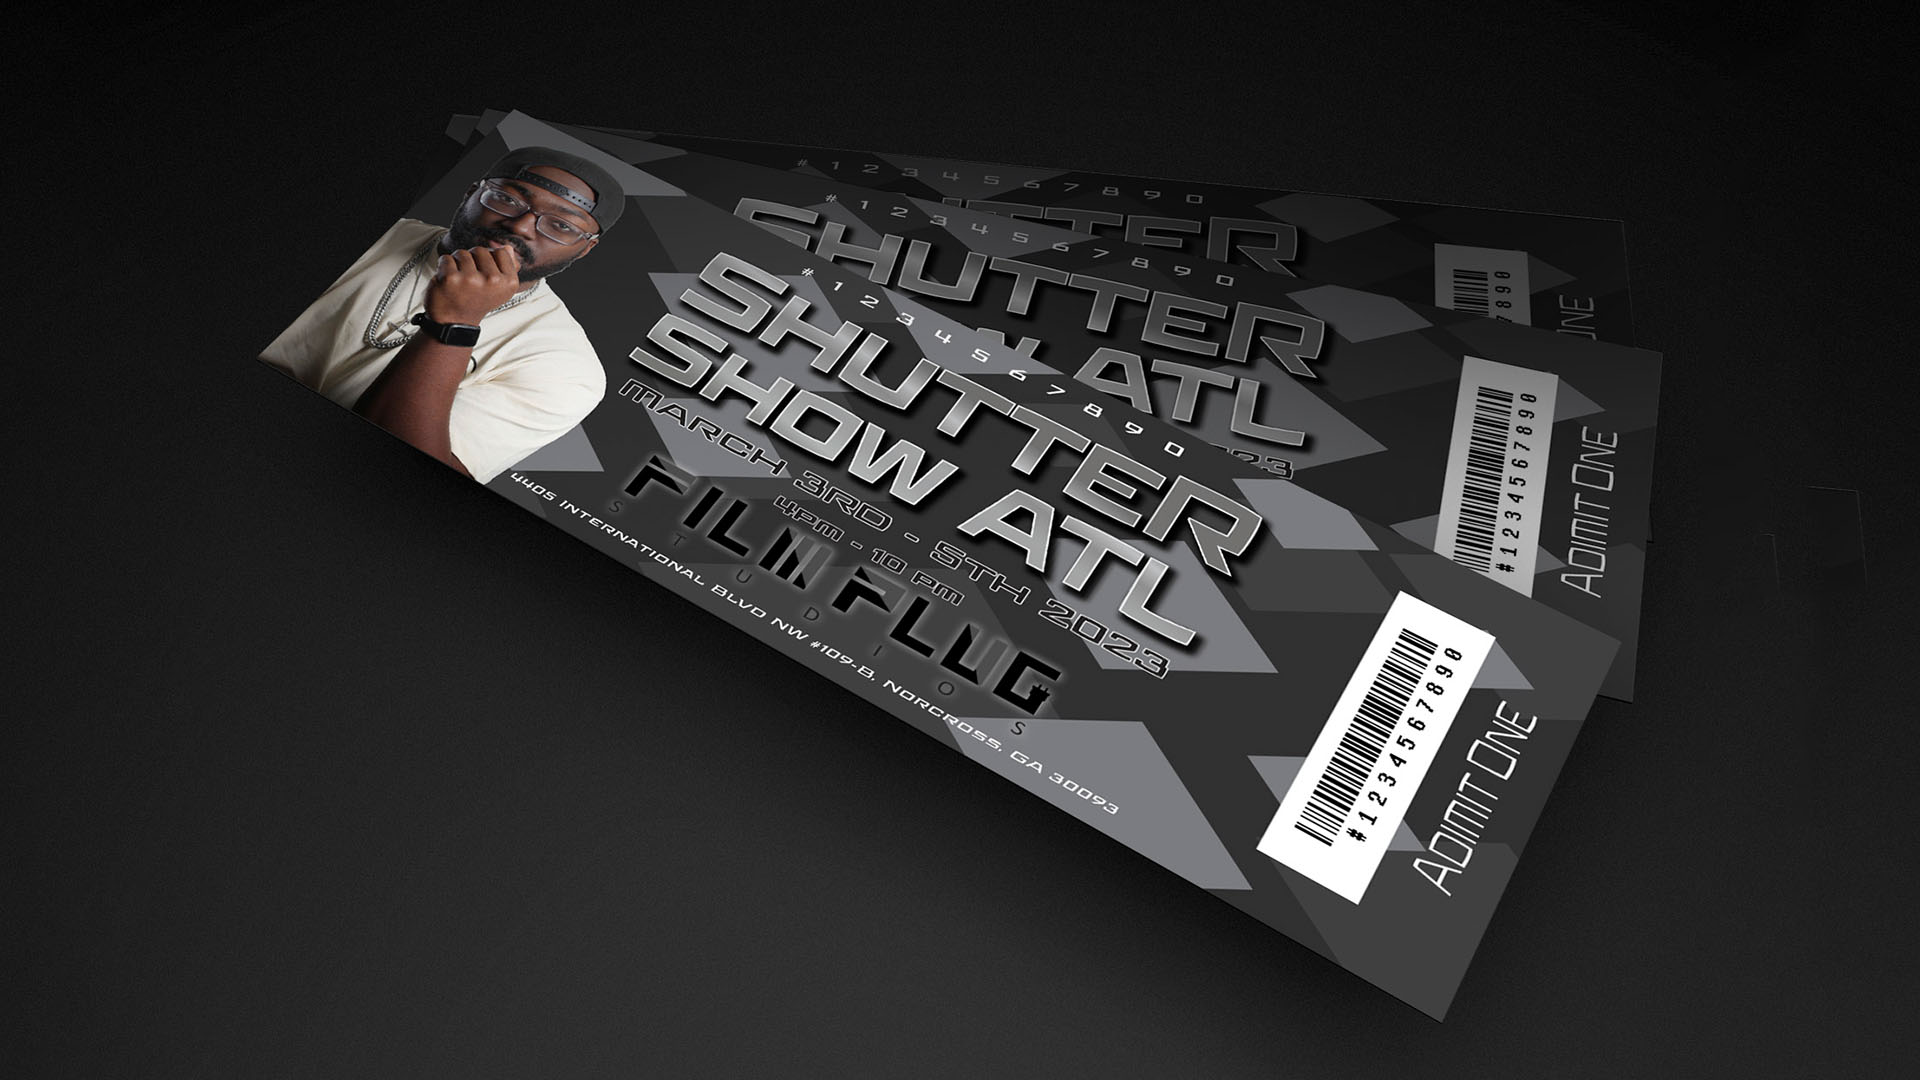 Shutter Show ATL / "Shutter Show ATL," Event ticket, 8.5 x 3.5 inches print,  2023. Custom Tickets to a private art exhibit.